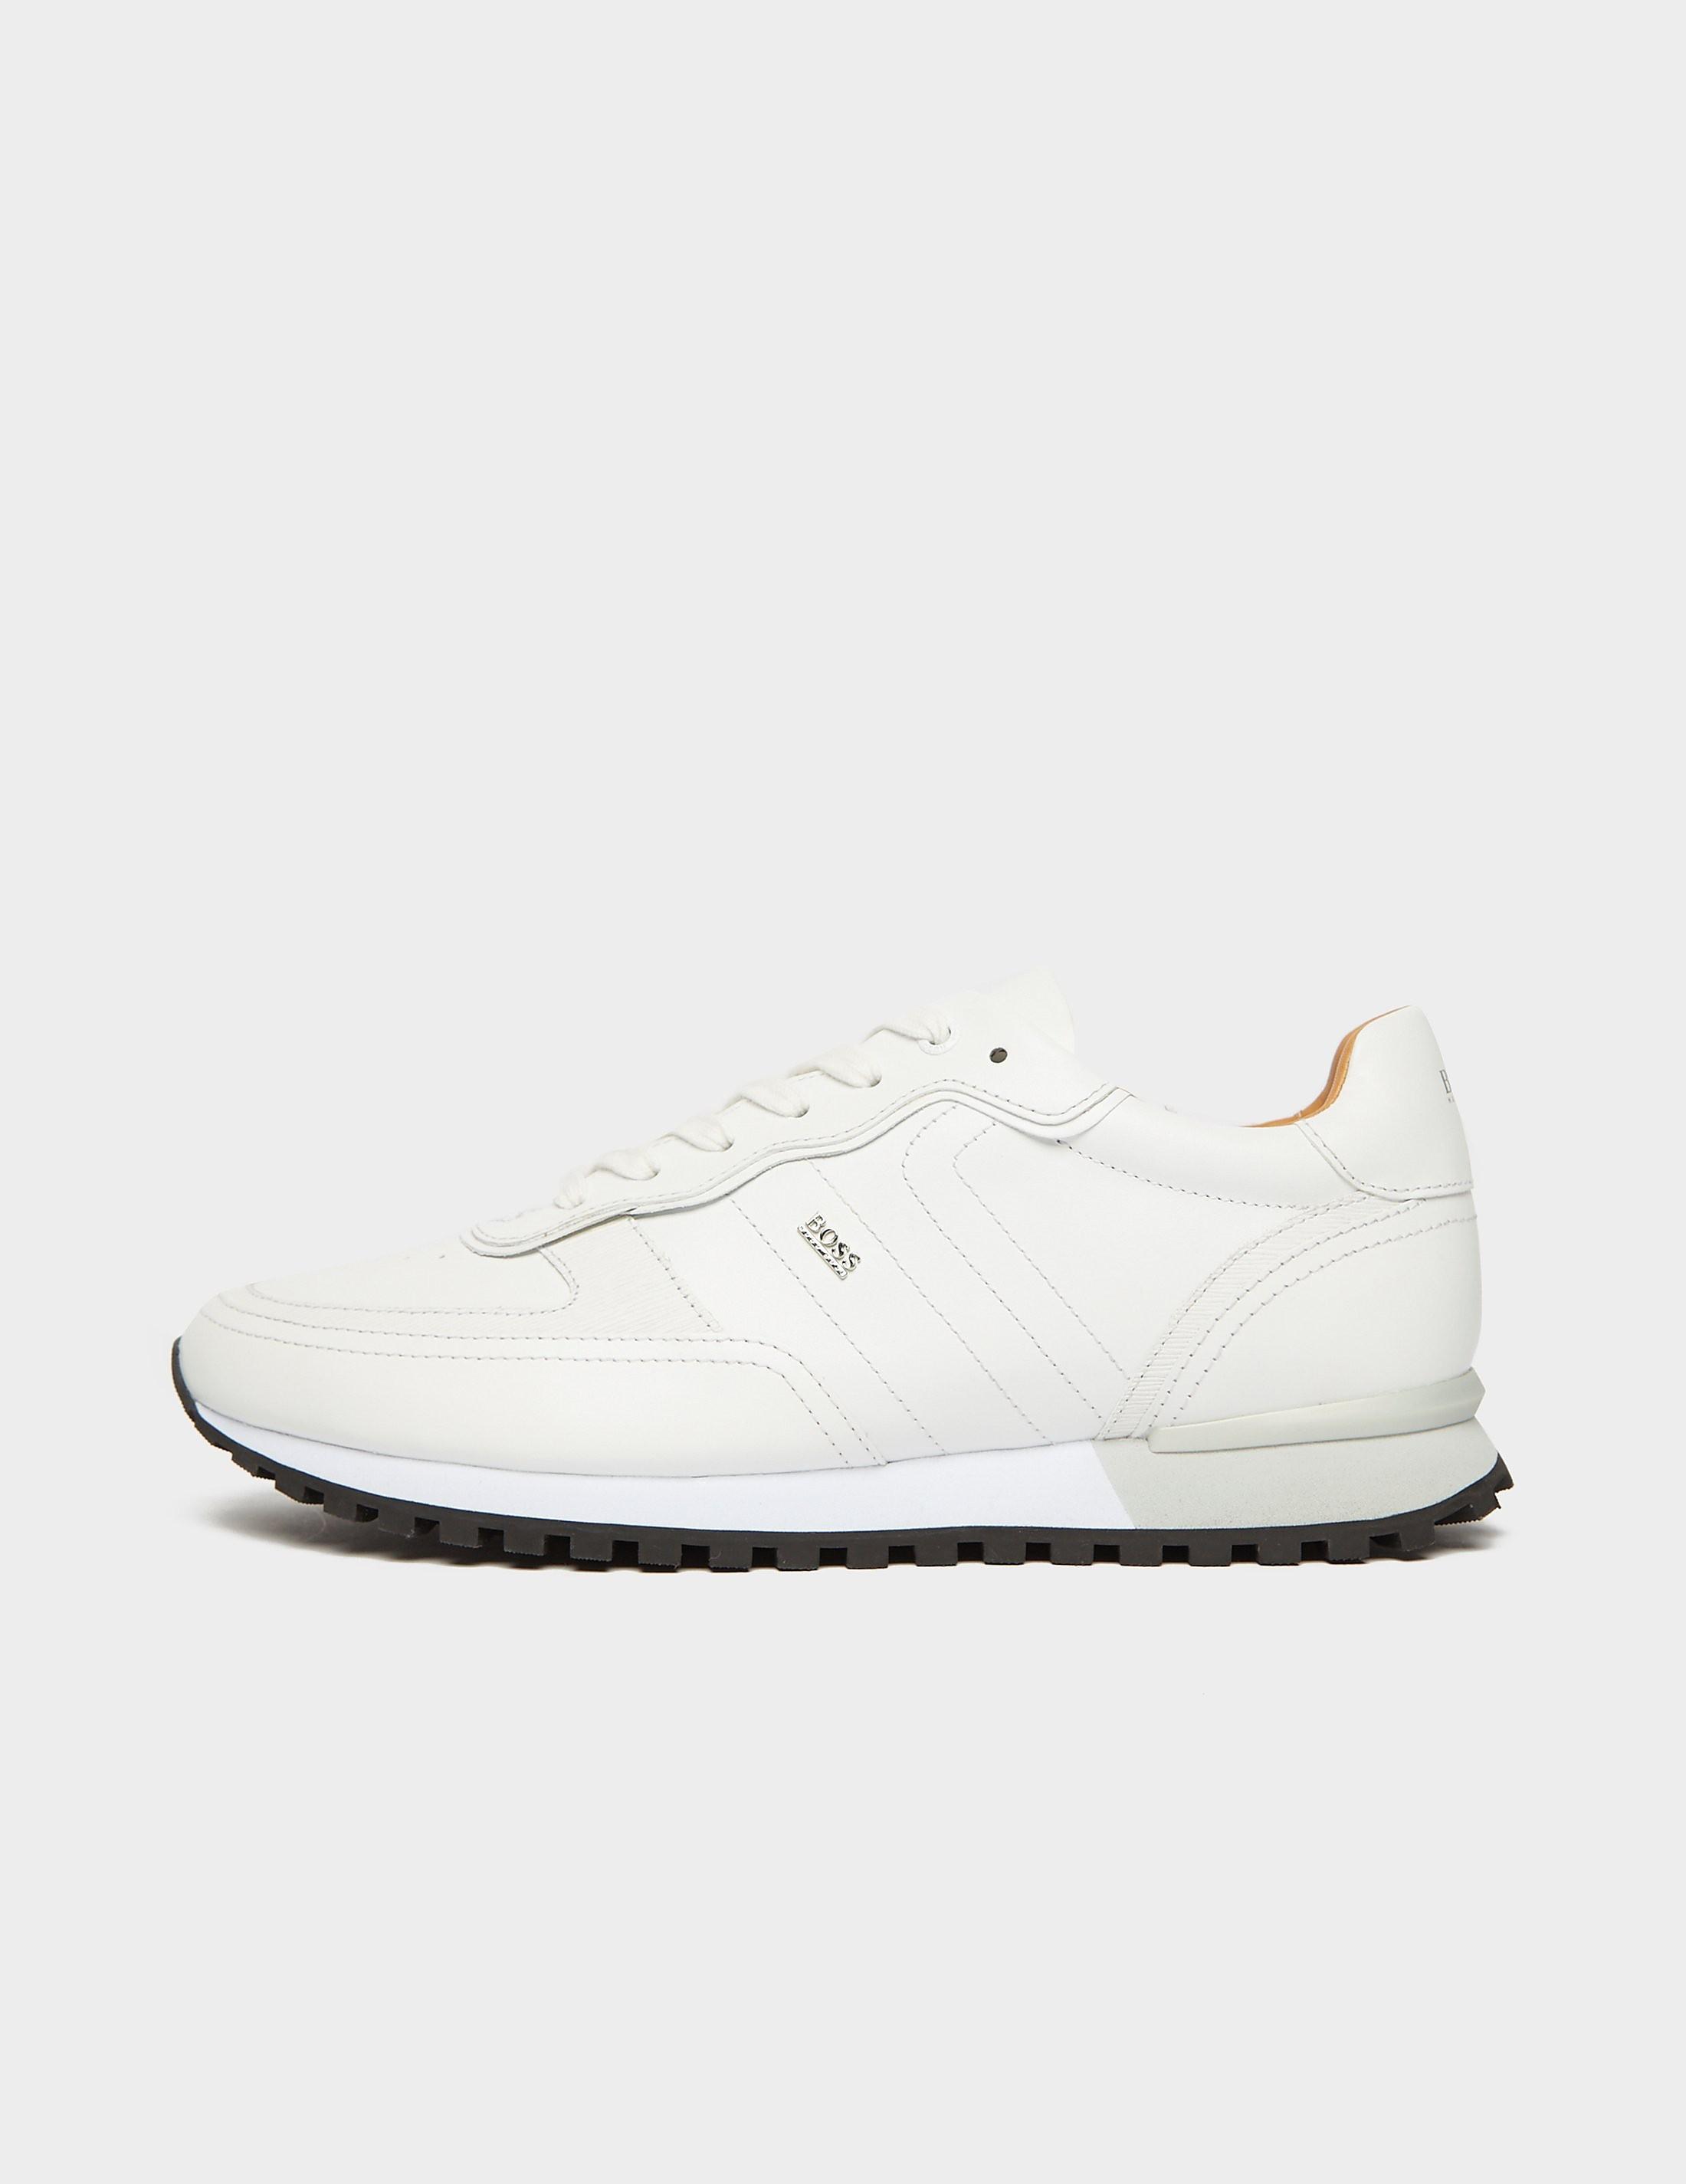 BOSS by HUGO BOSS Parkour Premium Leather Trainers in White for Men - Lyst